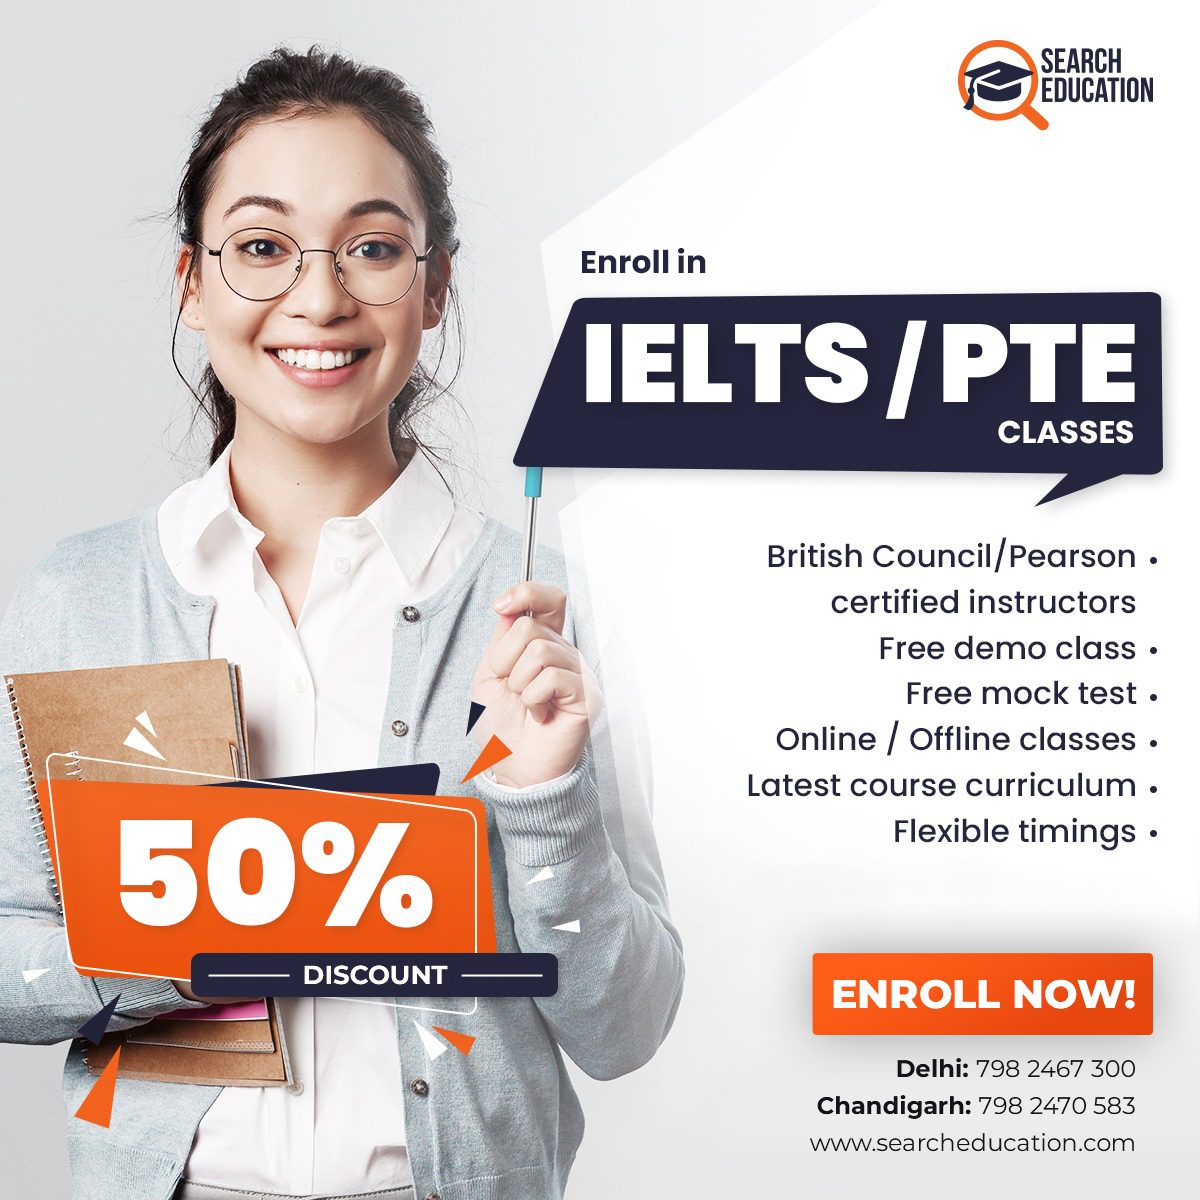 IELTS Coaching for Success | Search Education | Big Discount